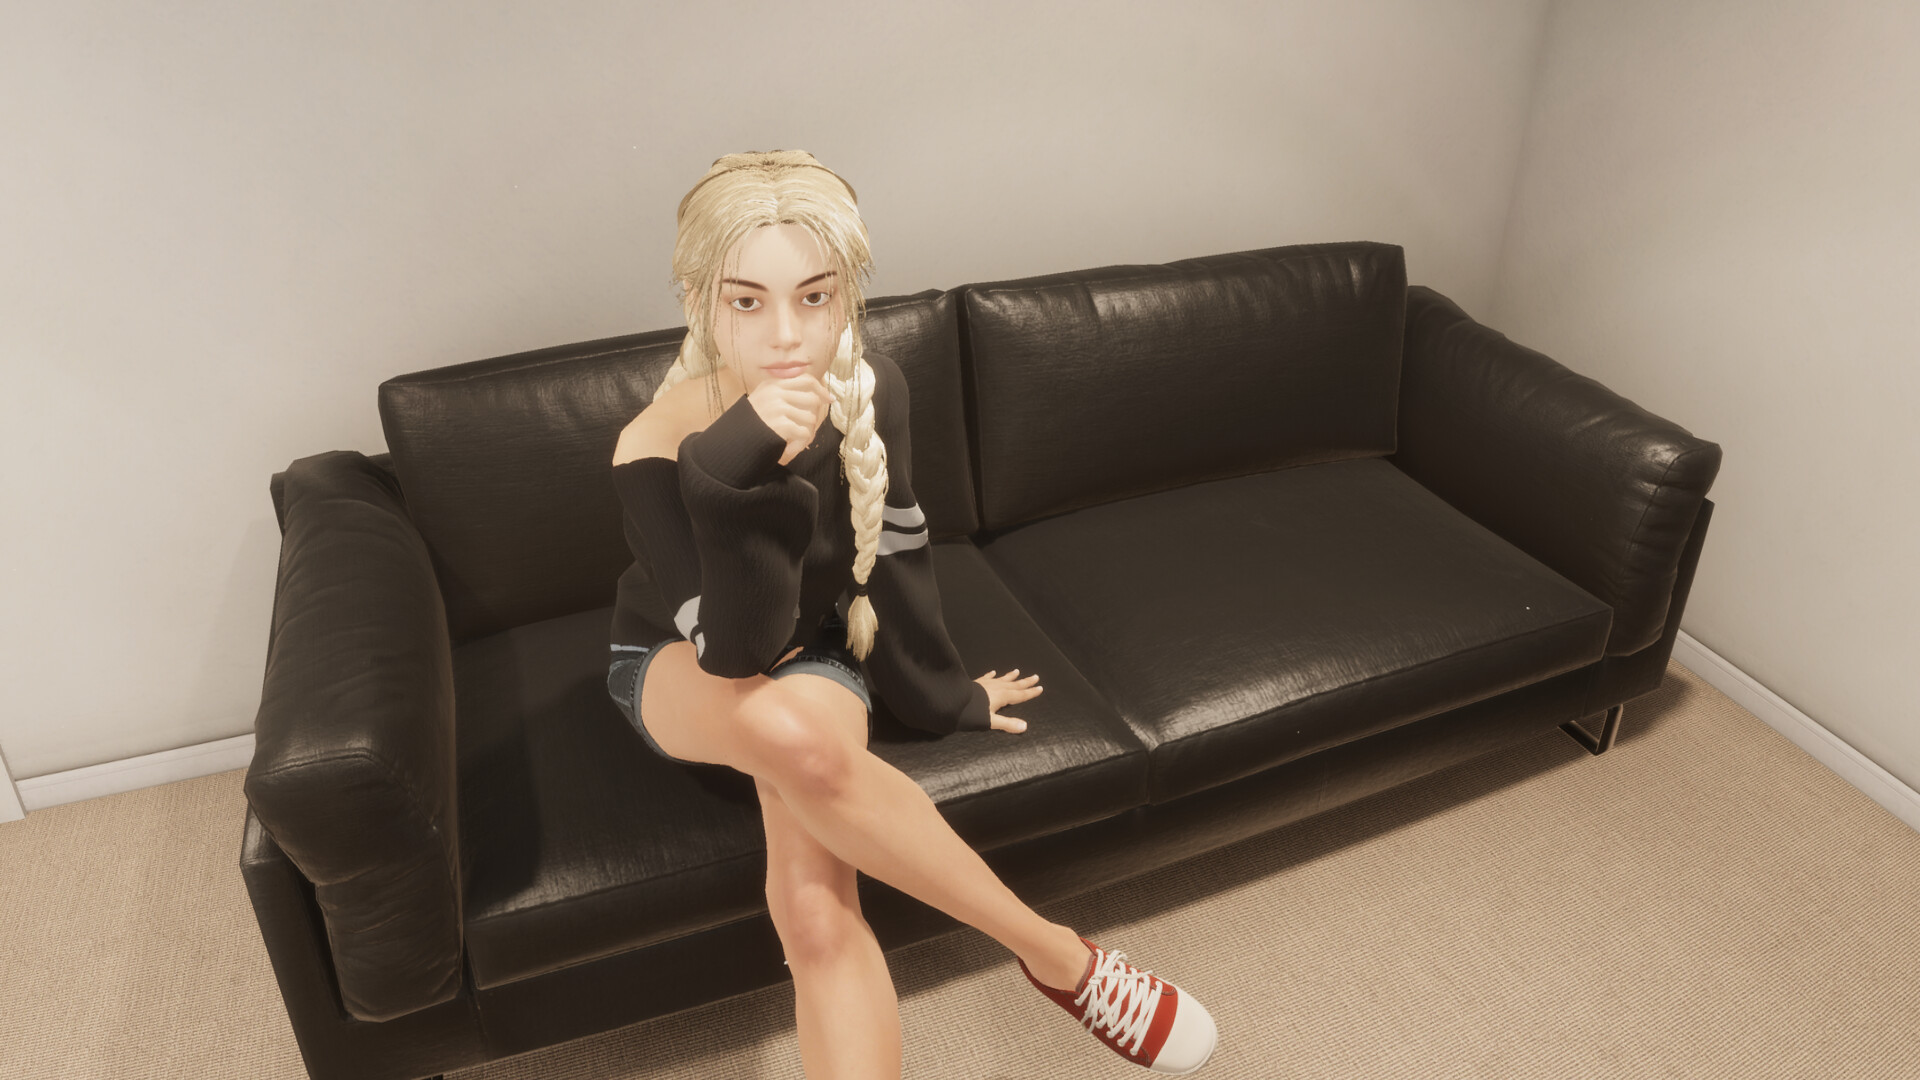 Casting Couch Simulator on Steam